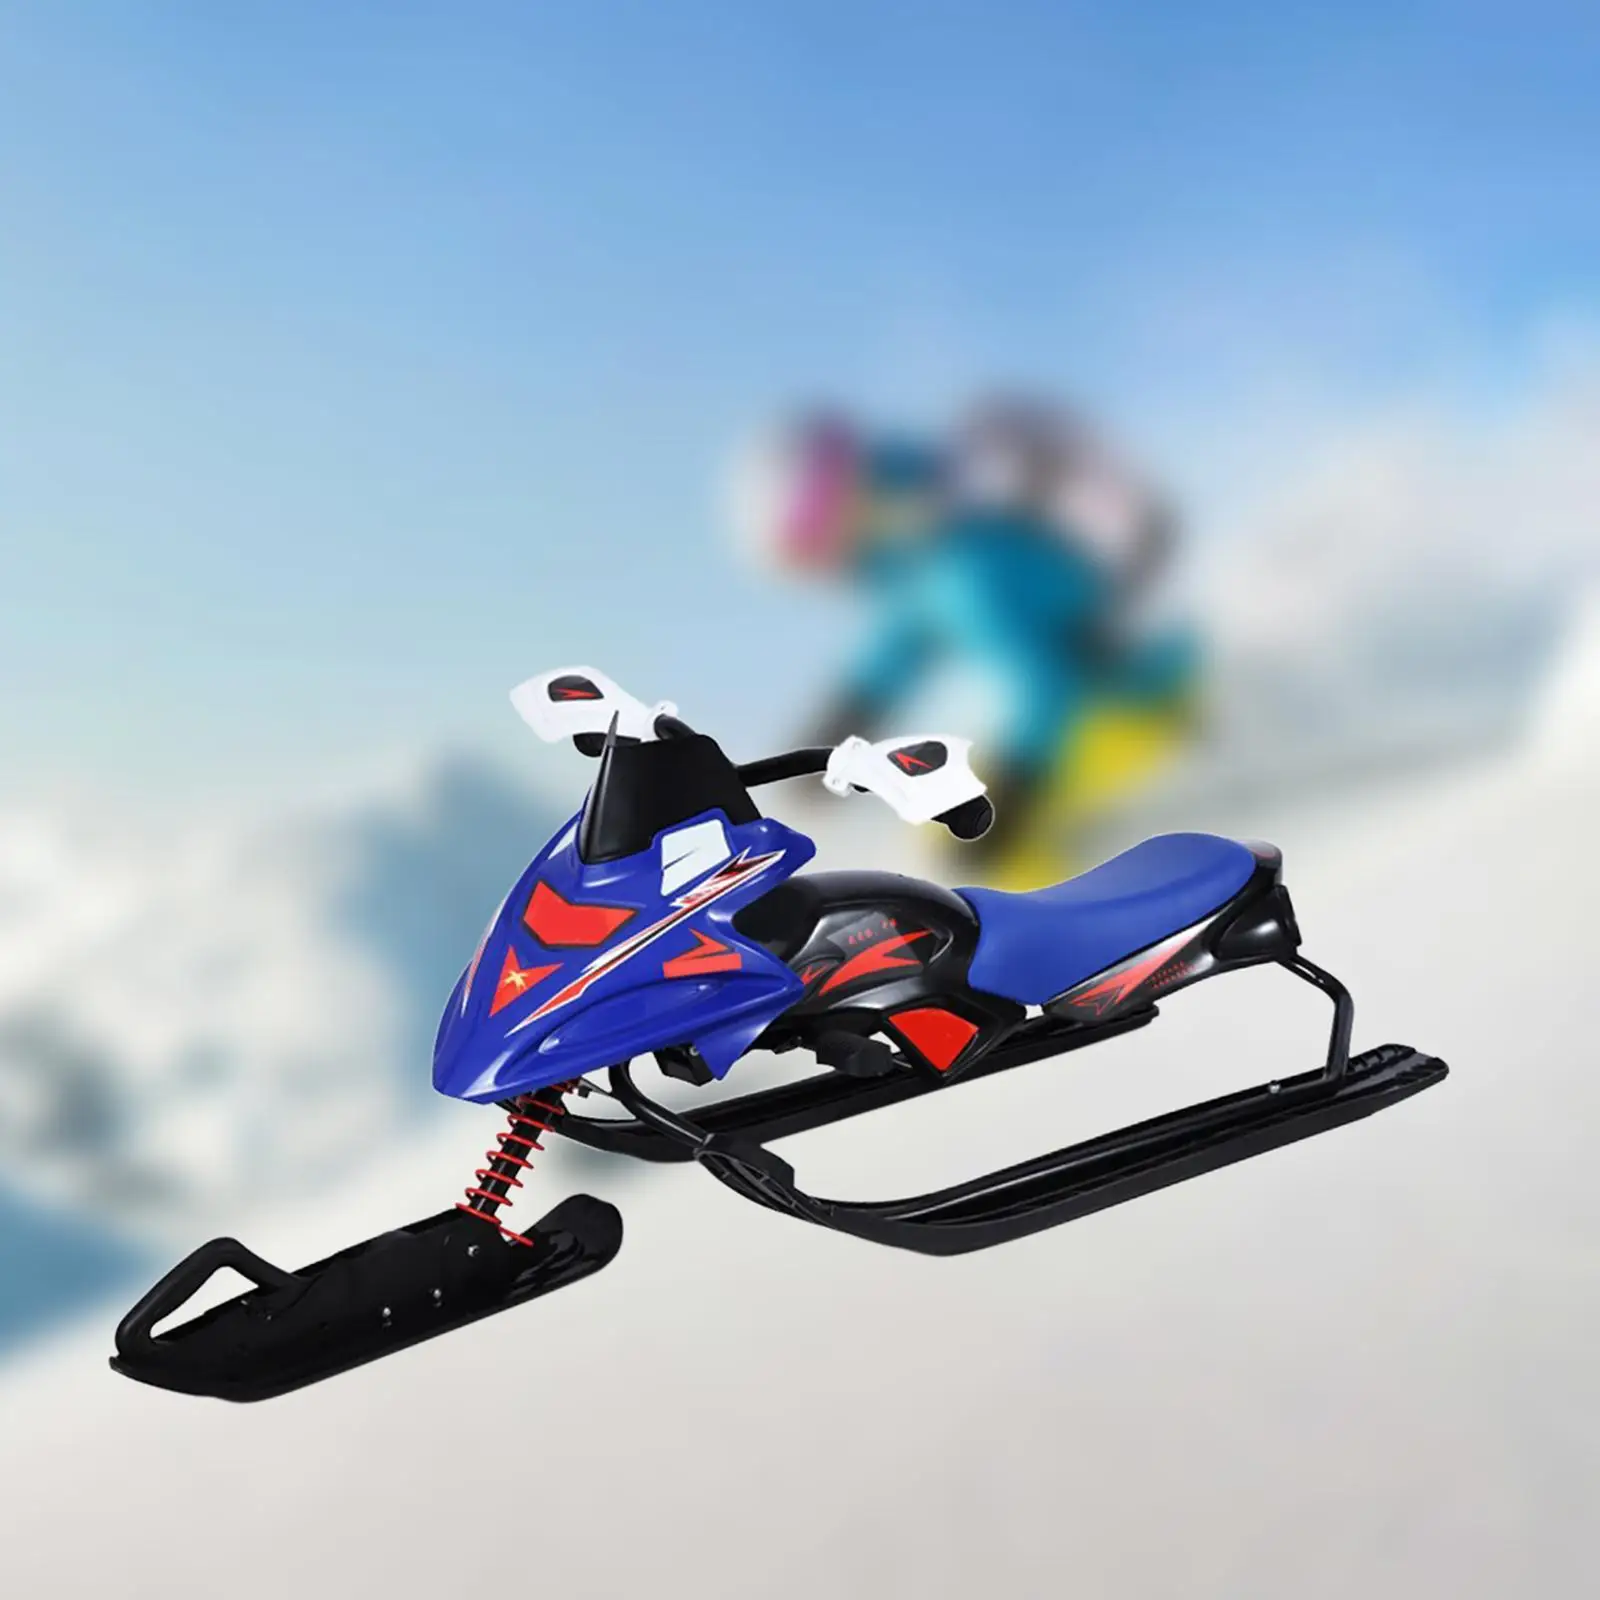 Snow Racer Sled with Steering Wheel and Bicycle Handle and Twin Brakes Snow Sledge Snowboard Snow Bike Sled for Kids Adult Teens